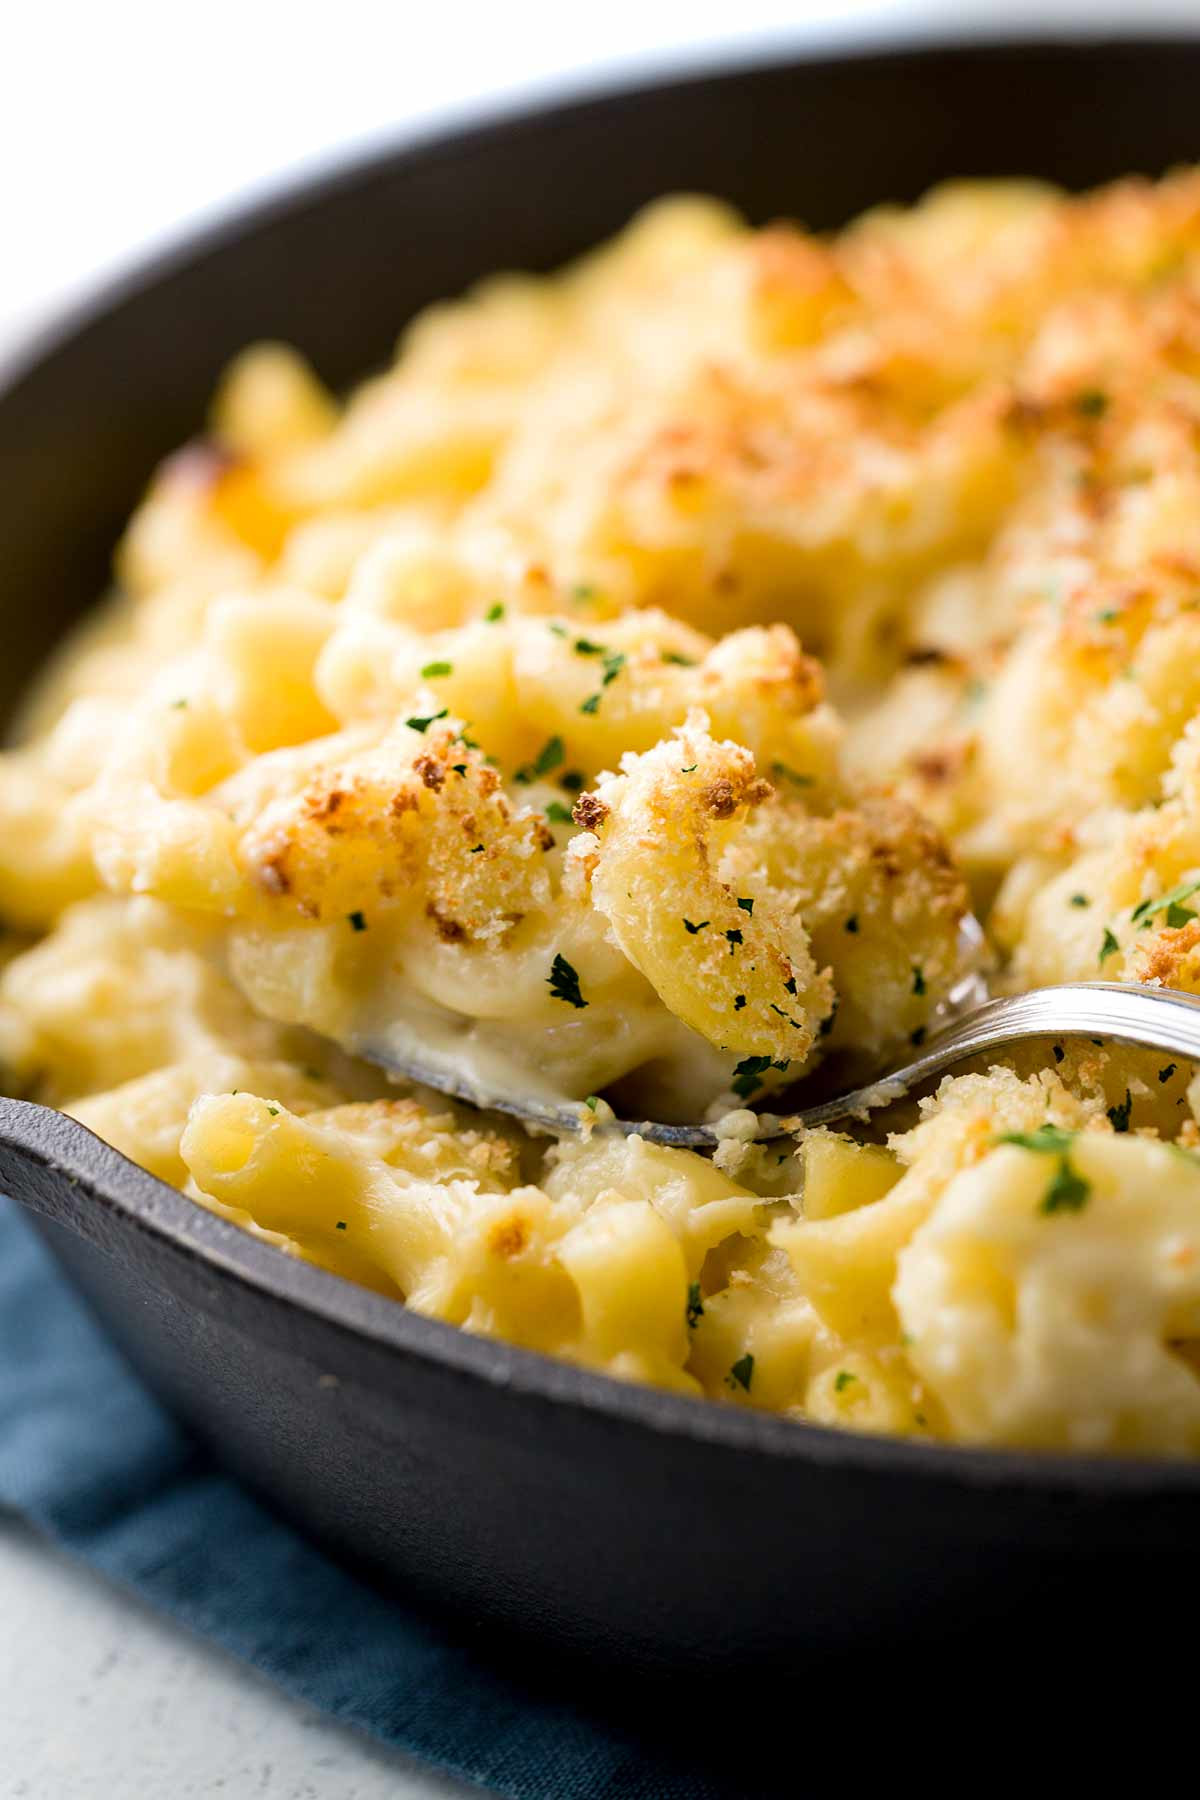 Baked Macaroni And Cheese With Bread Crumbs Recipe
 Baked Macaroni and Cheese with Bread Crumb Topping